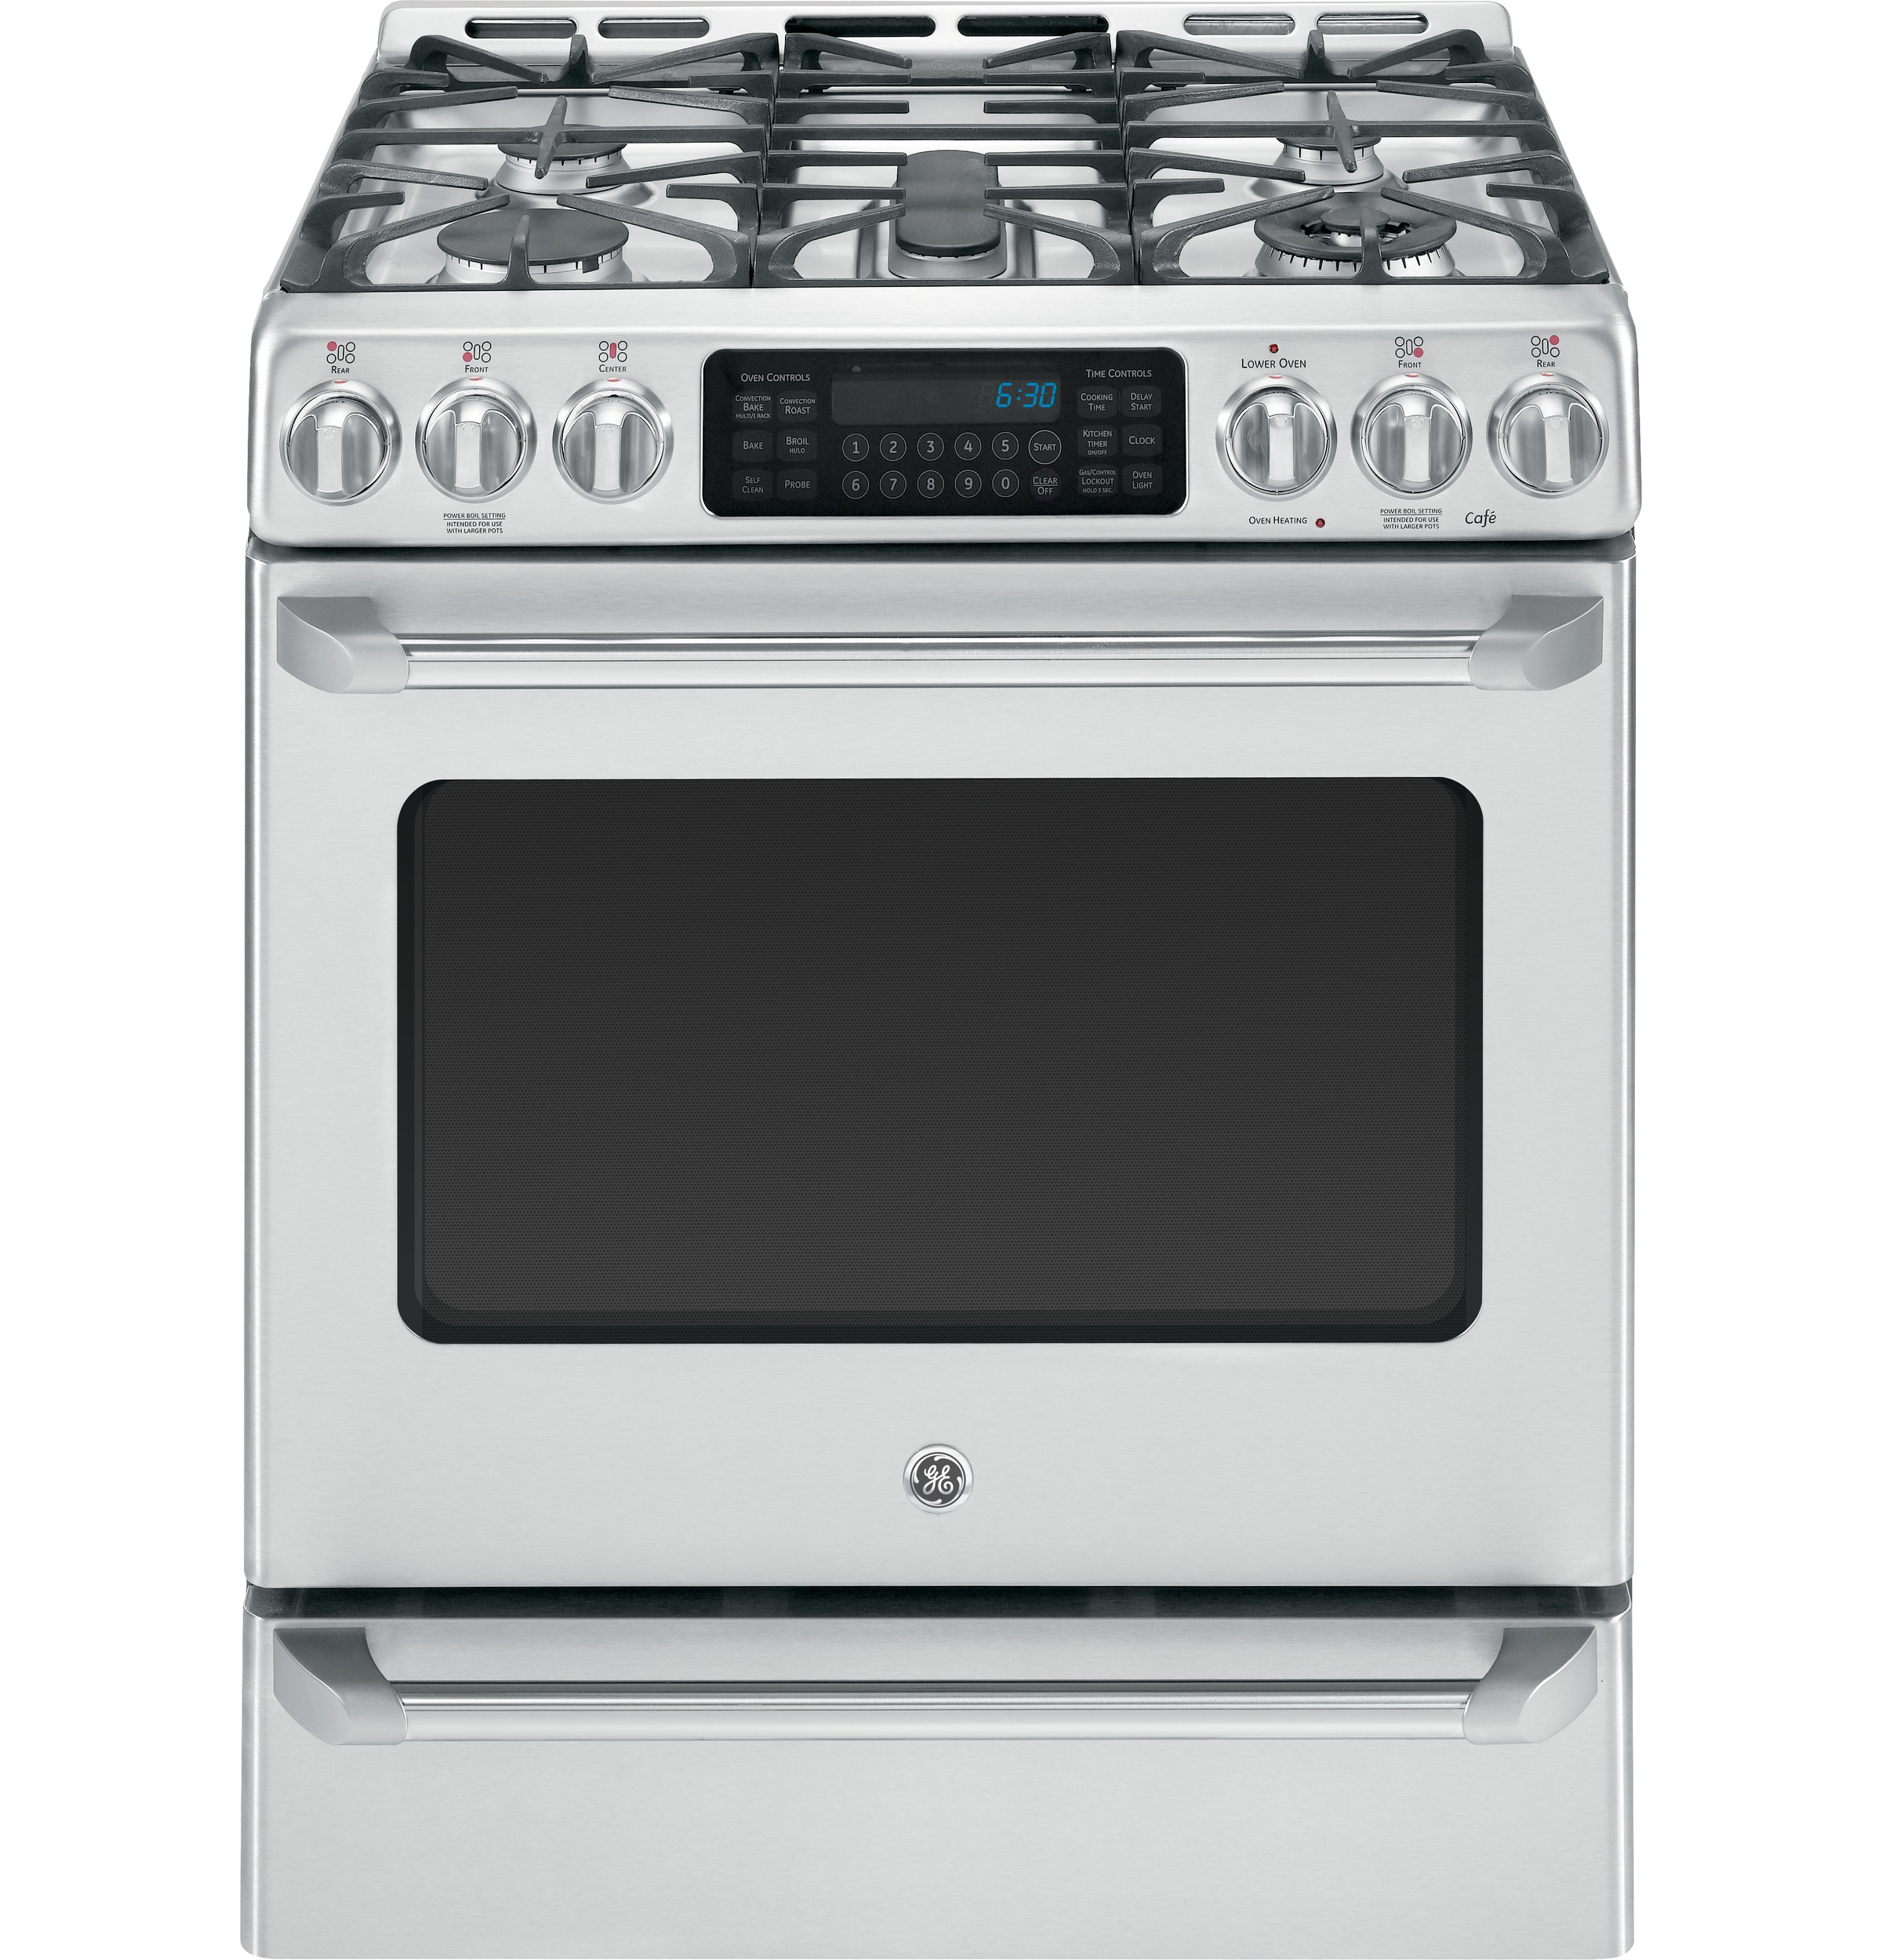 GE Cafe CGS985SETSS 6.4 cu. ft. Gas Range with Self-Cleaning Convection Ge Stainless Steel Stove Gas